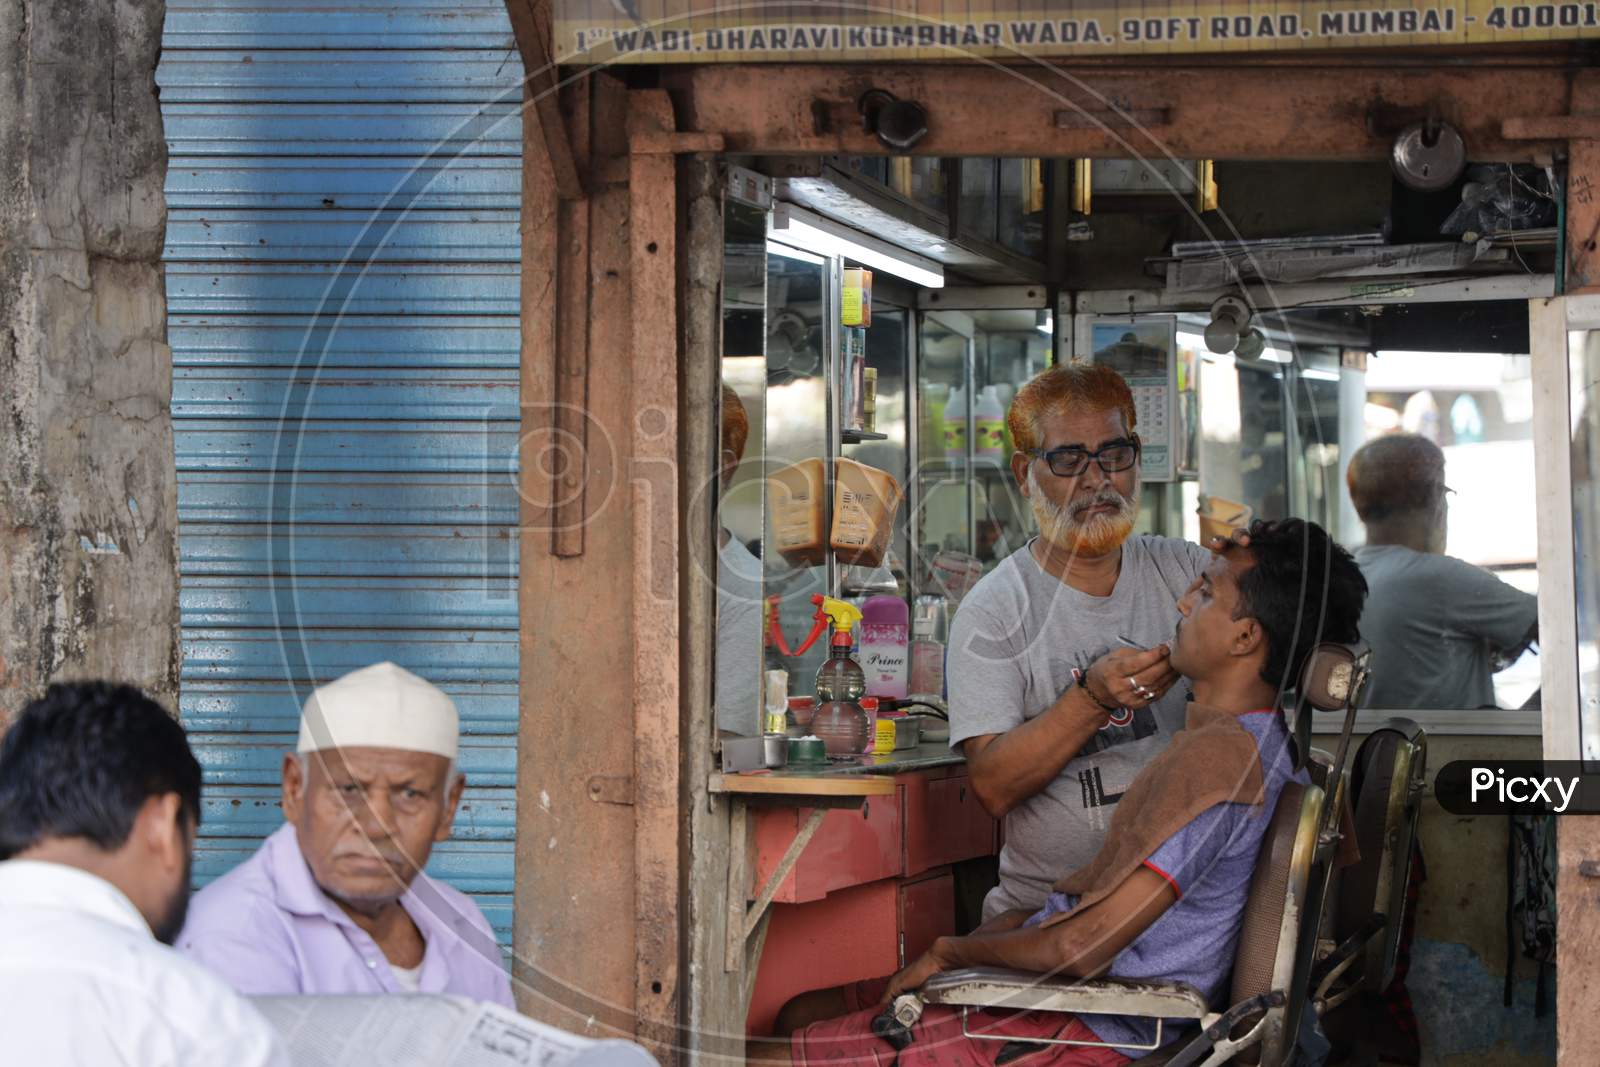 A Barber Shop On The Street